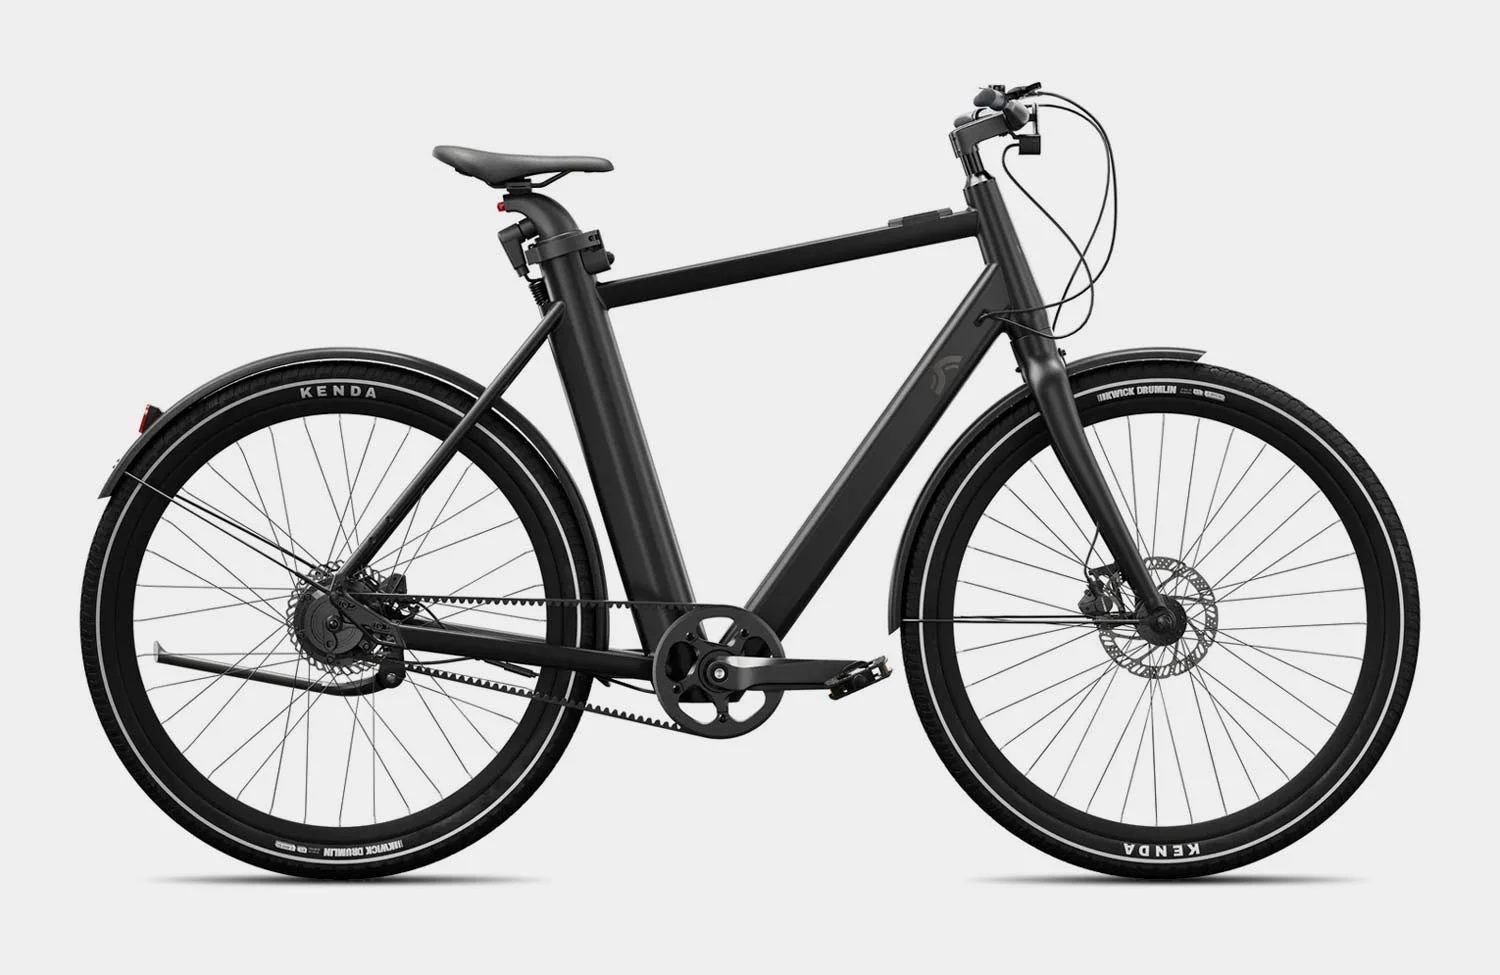 An urban e-bike from the discounter: we take a look at the new Crivit bike  from Lidl —